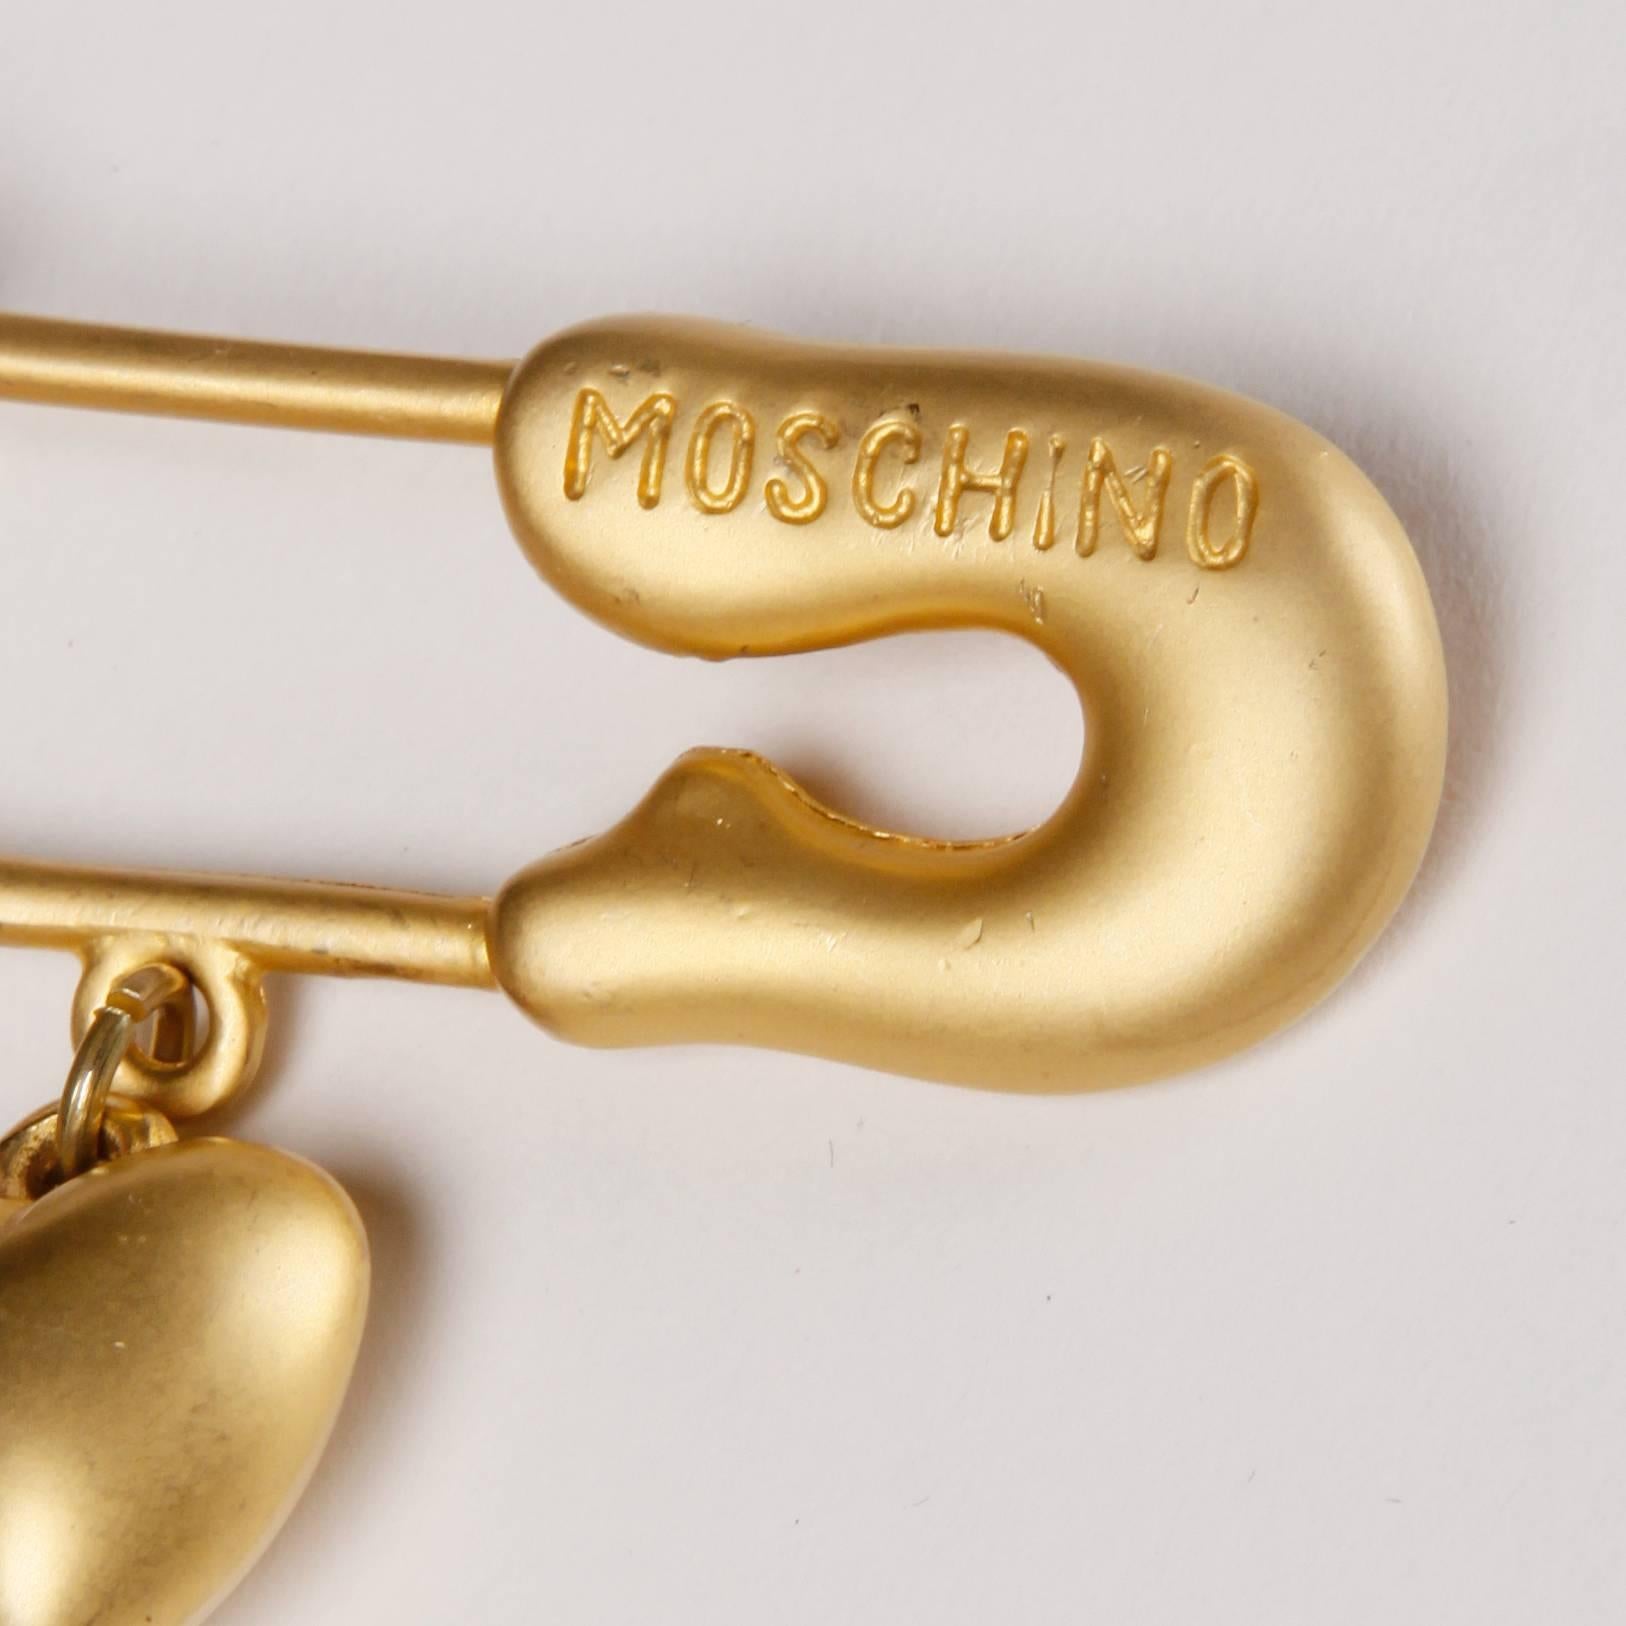 Vintage Moschino gold brooch in the shape of an oversized safety pin. The brooch has three dangling charms; a peace sign, an ampersand, and a heart. From Moschino's iconic 